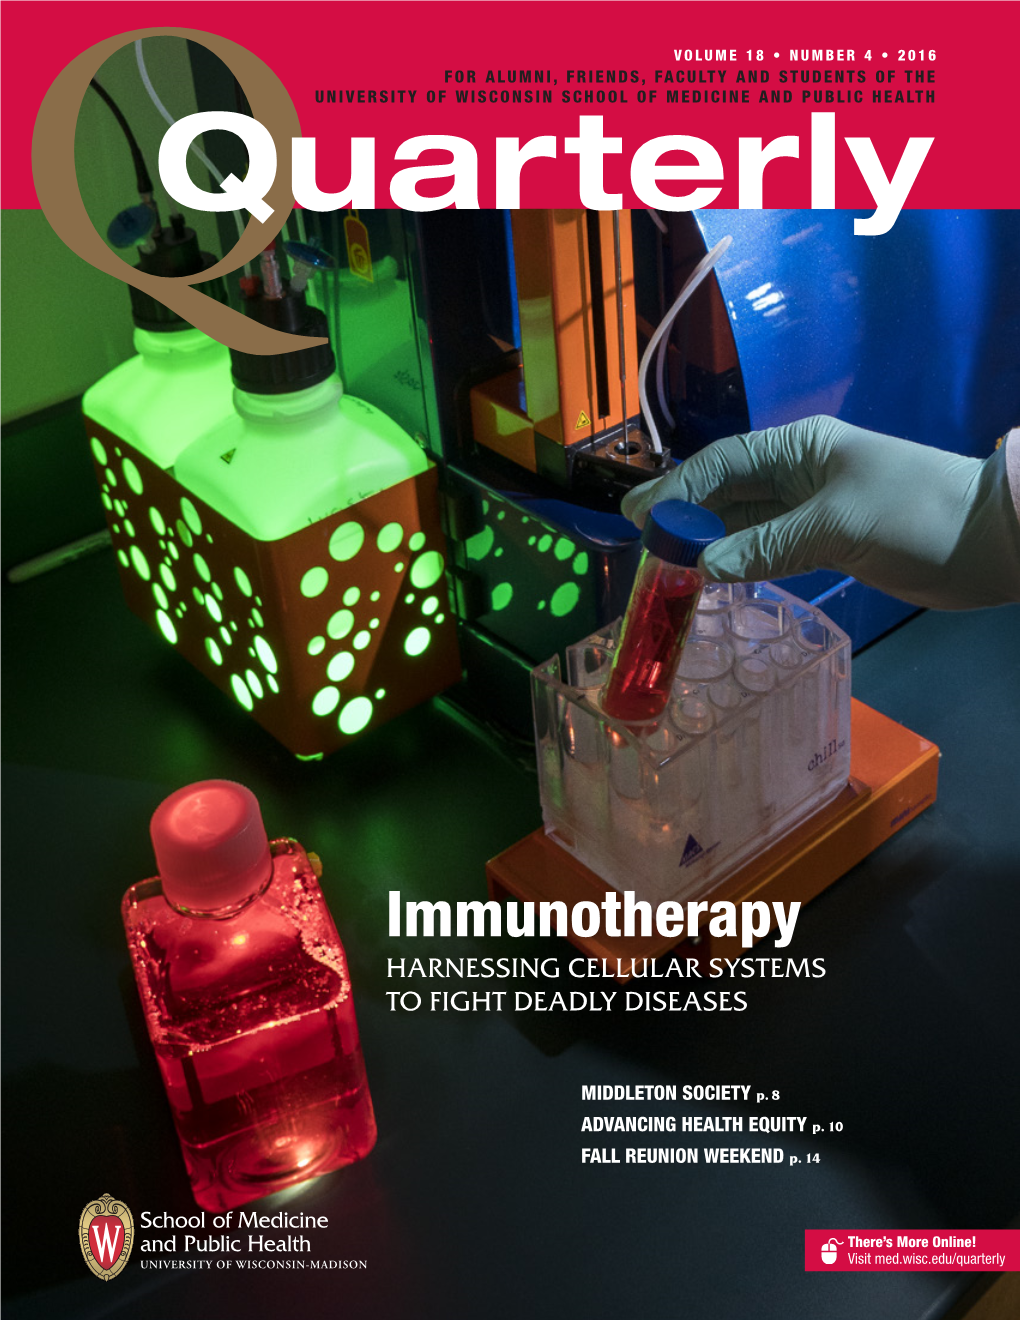 Immunotherapy Also: Middleton Society, Advancing Health Equity